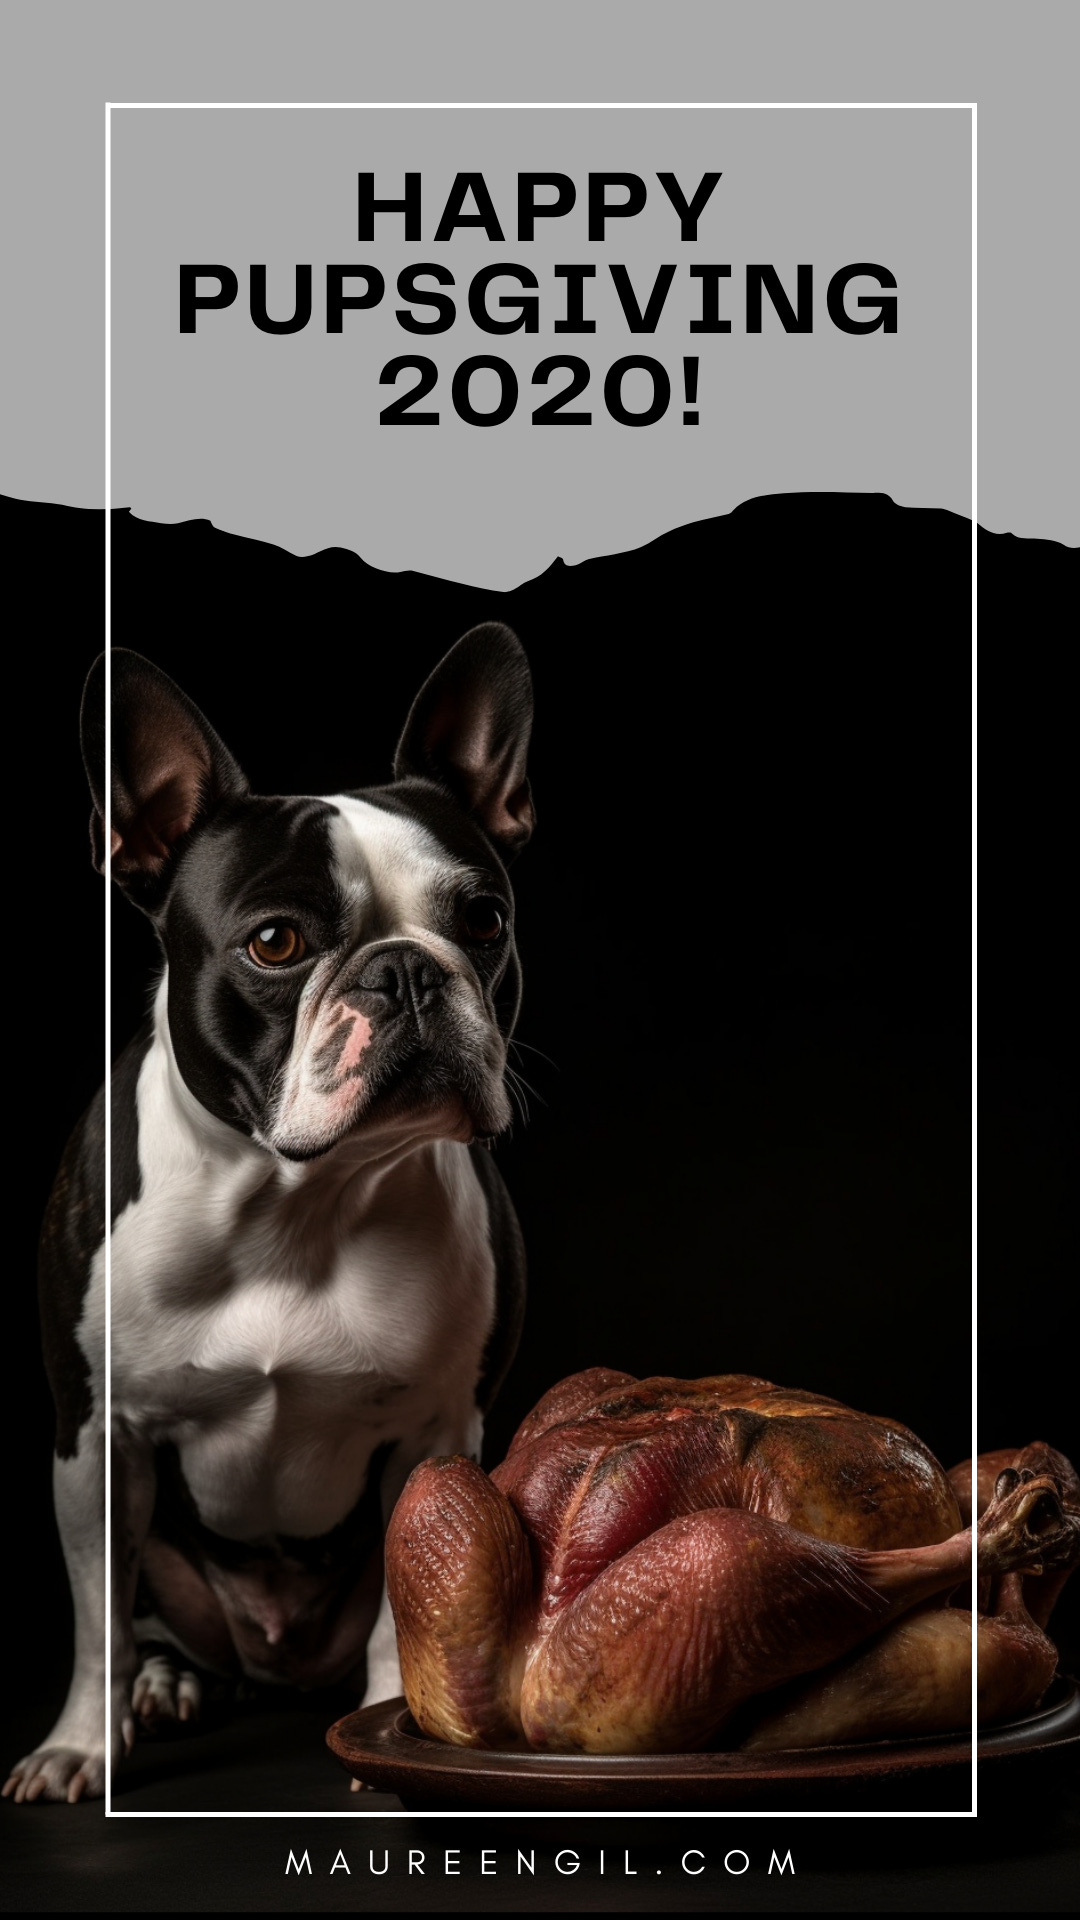 Thanksgiving ... er, I mean, Pupsgiving ... was declared by Abraham Lincoln during the Civil War and eventually evolved to what we know today. So first of all, Happy Pupsgiving 2020 to all my readers!